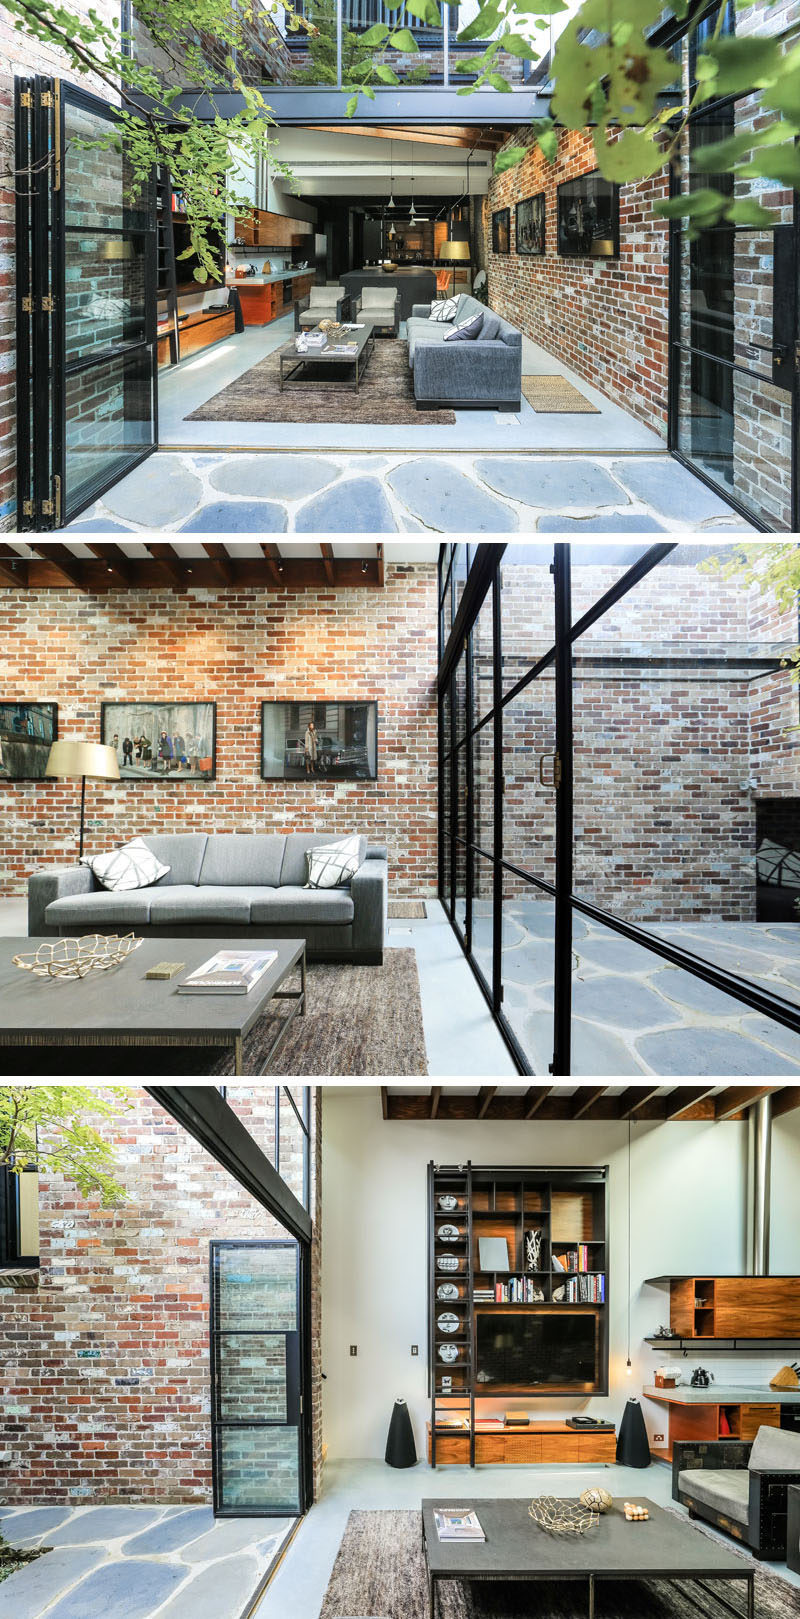 Sam Crawford Architects have transformed what was once a commercial garage sandwiched between terrace houses, into a bright and modern home that's long and narrow, and features a material palette of black steel, recycled brick, concrete and timber.